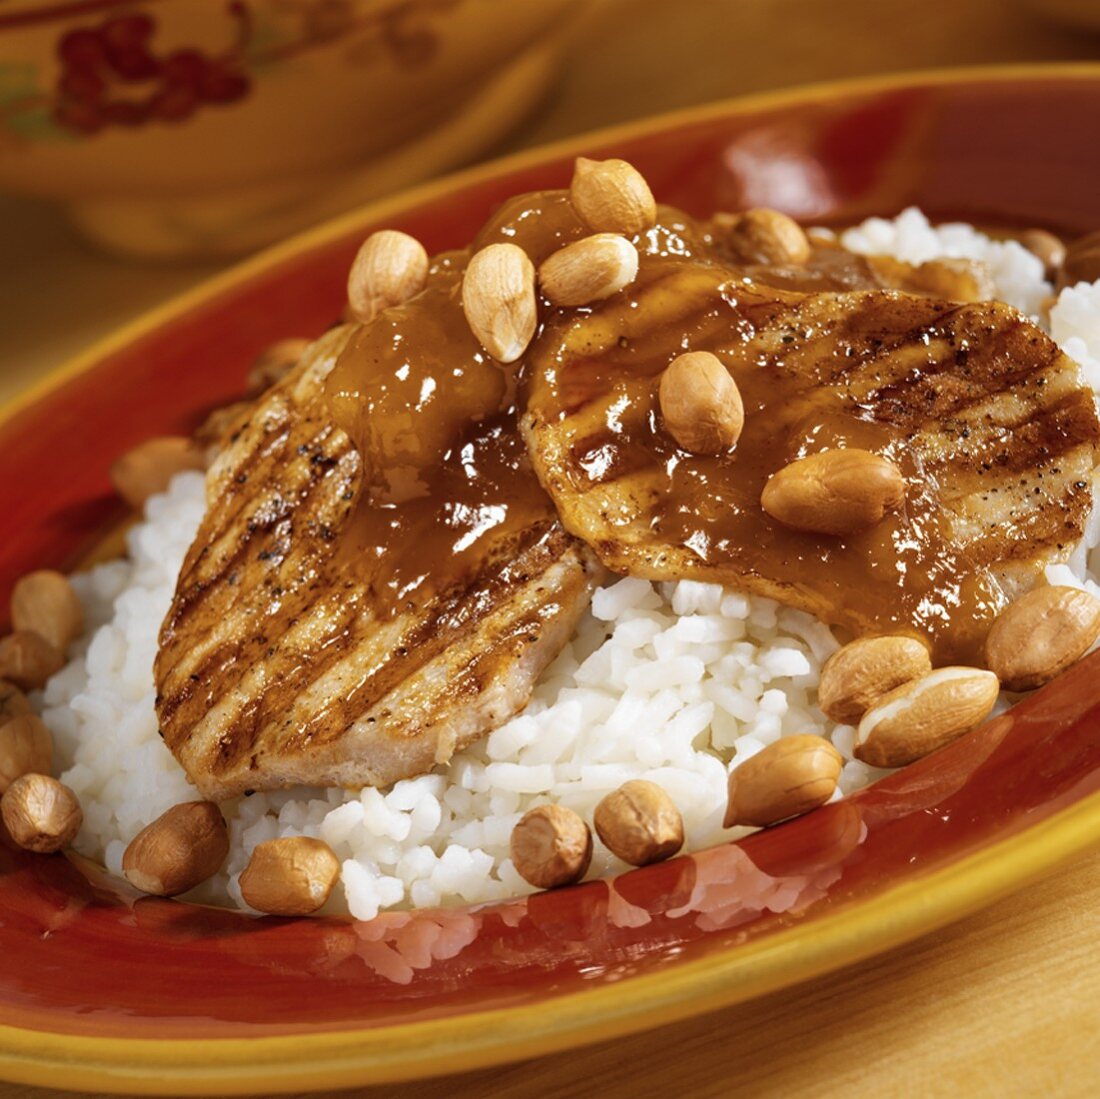 Grilled Pork Medallion Over Rice with Chutney and Peanuts